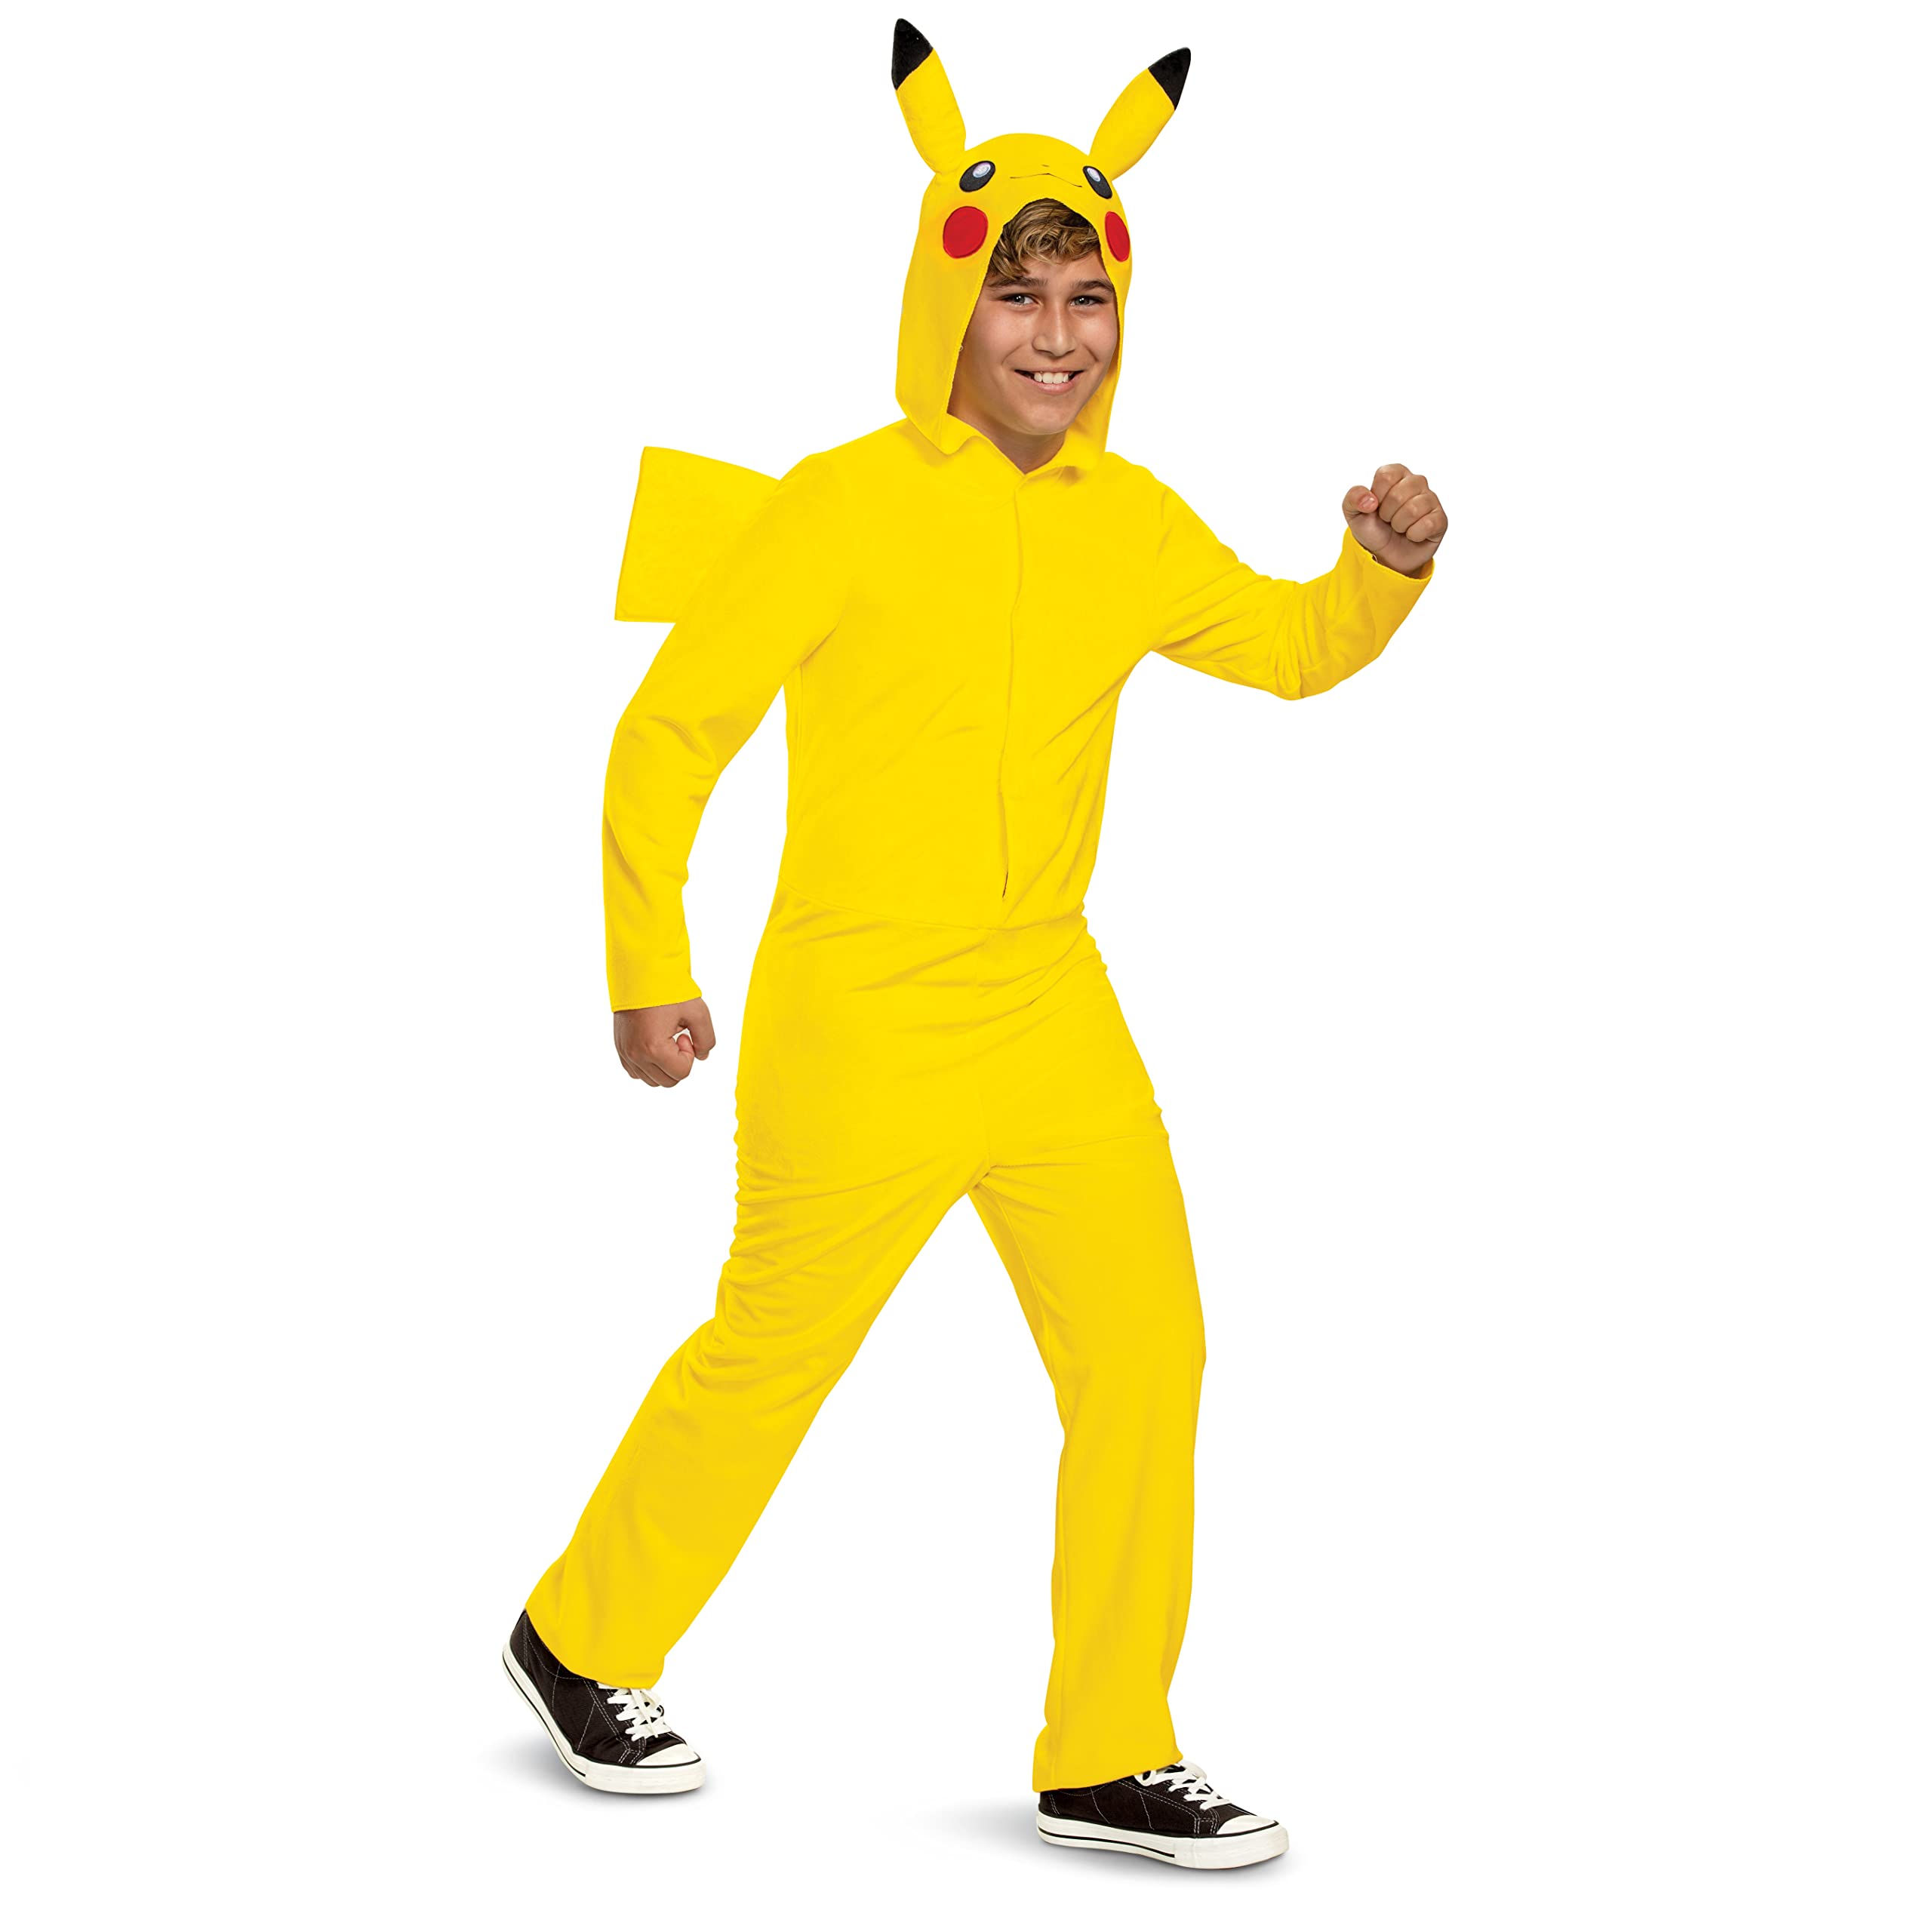 Pikachu Costume for Kids, Official Pokemon Costume Hooded Jumpsuit